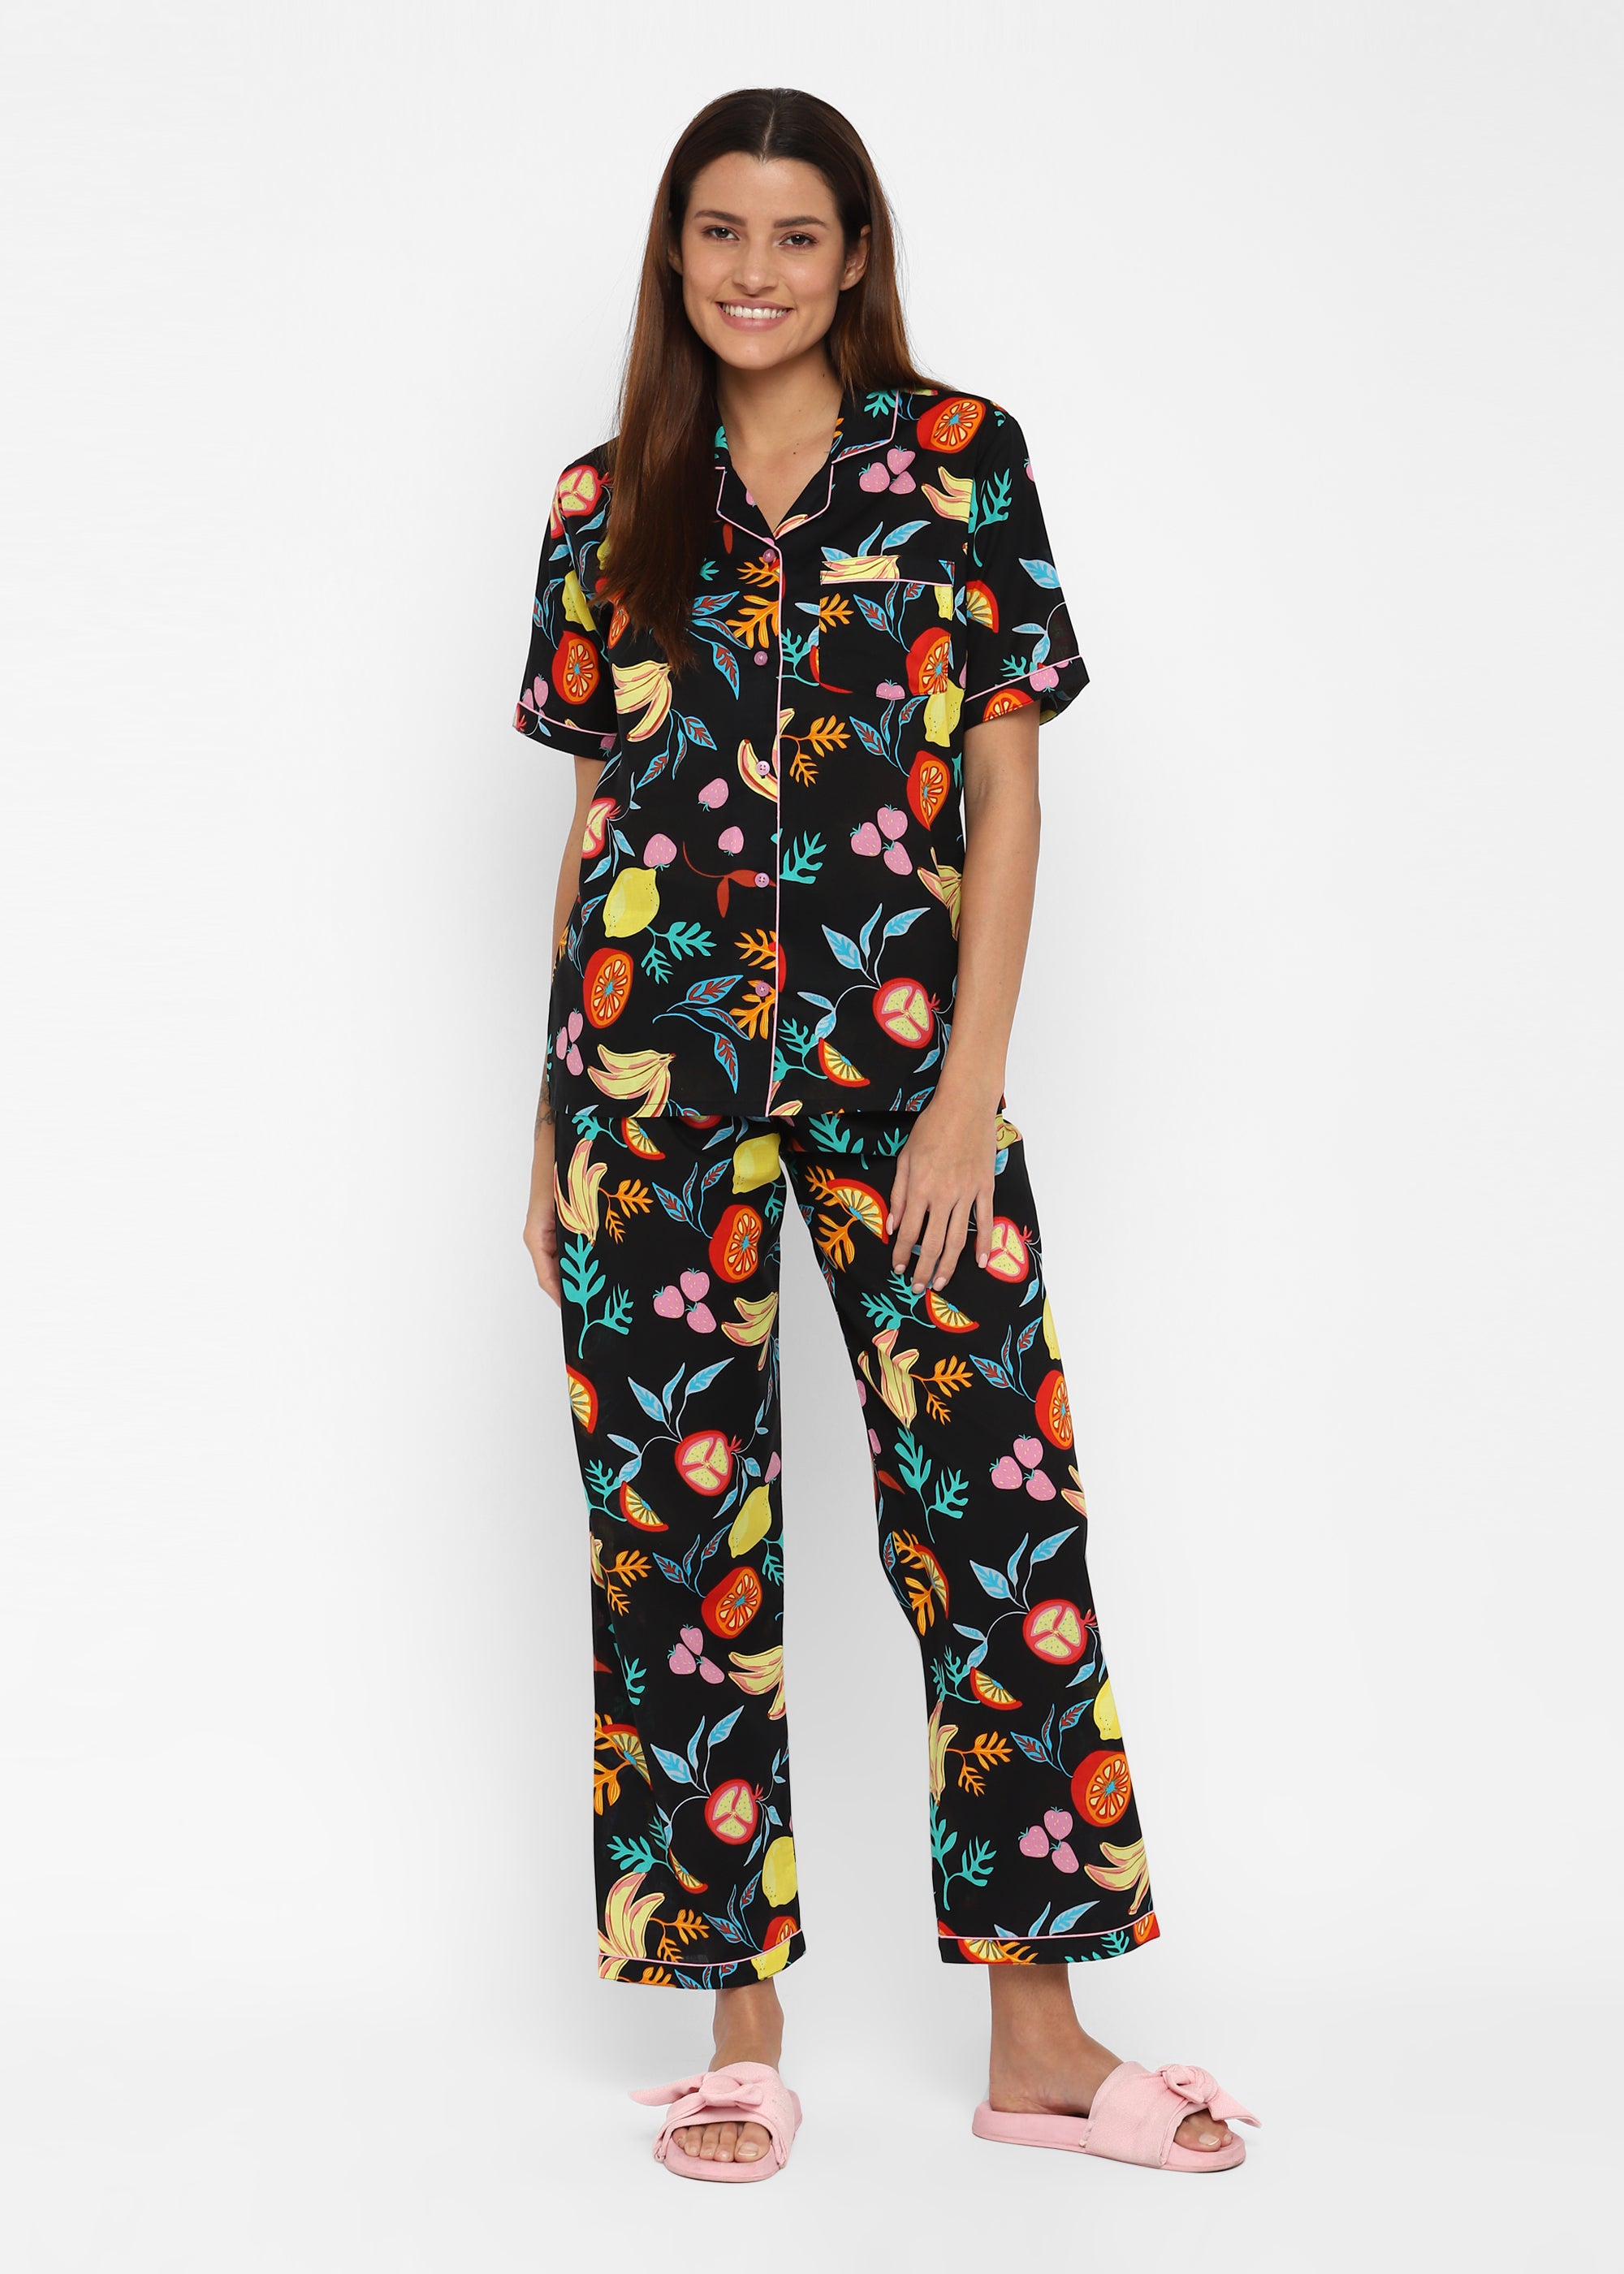 Mixed Colorful Print Short Sleeve Women's Night Suit - Shopbloom